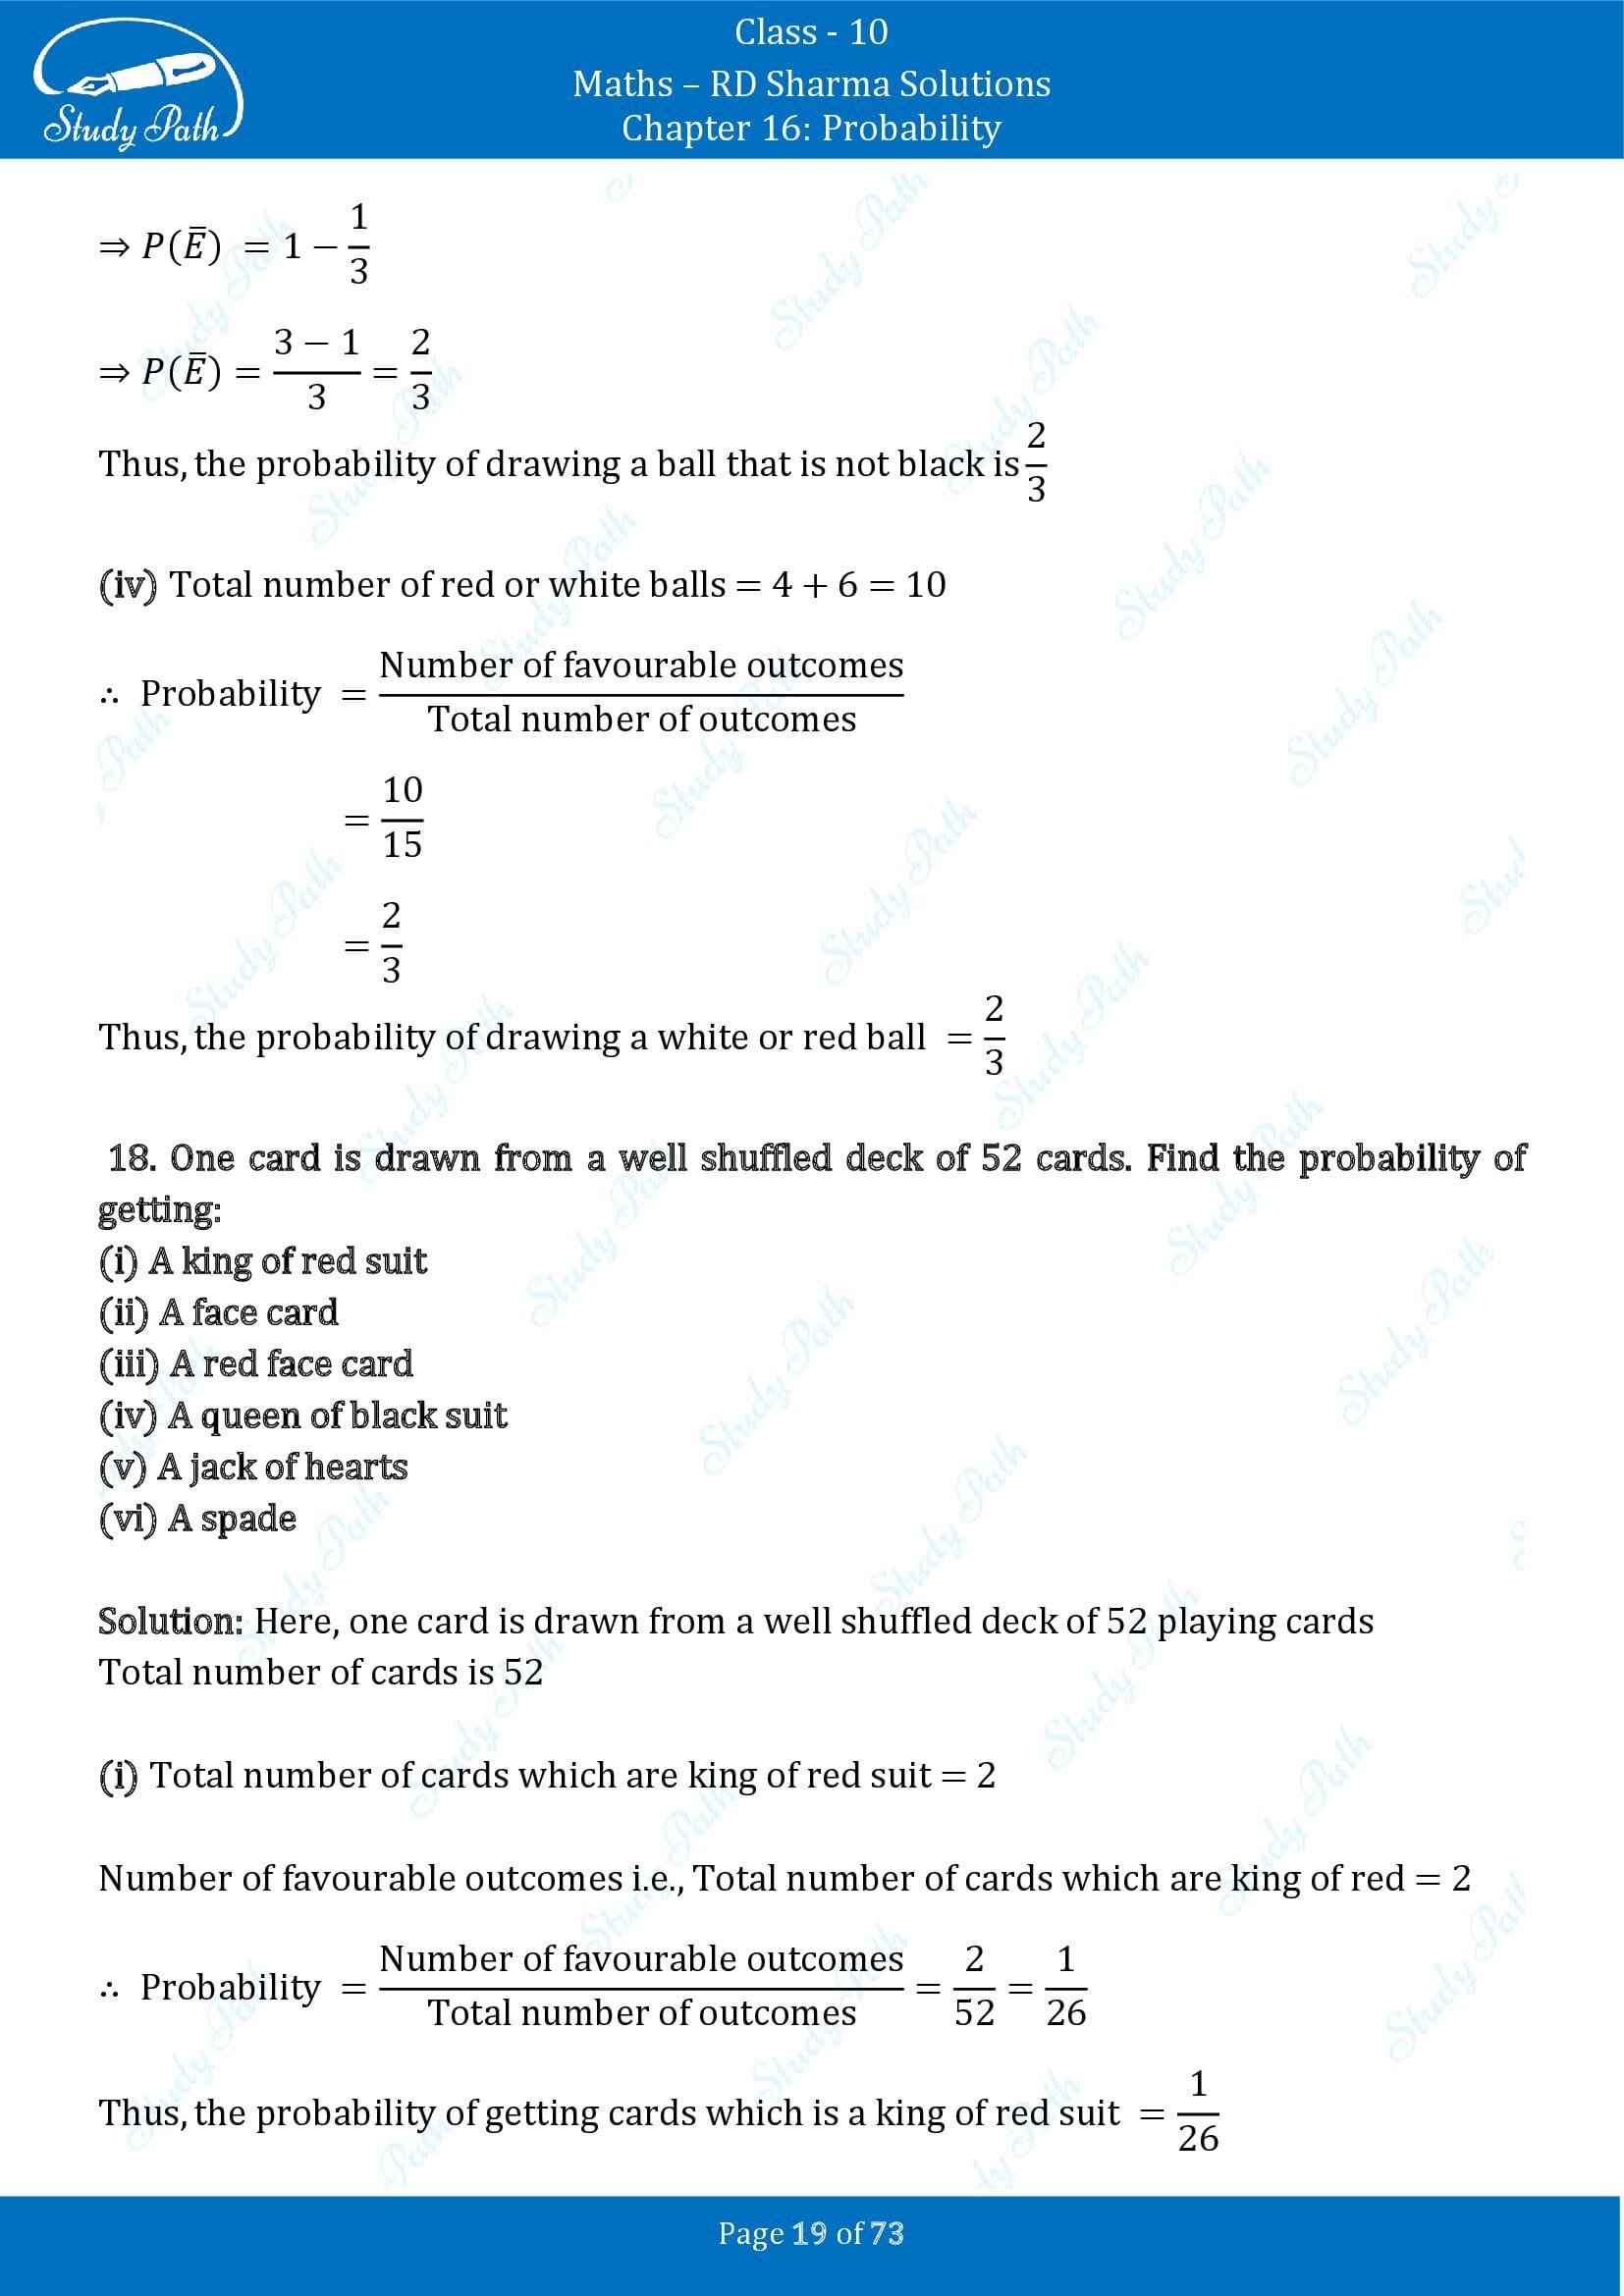 RD Sharma Solutions Class 10 Chapter 16 Probability Exercise 16.1 00019